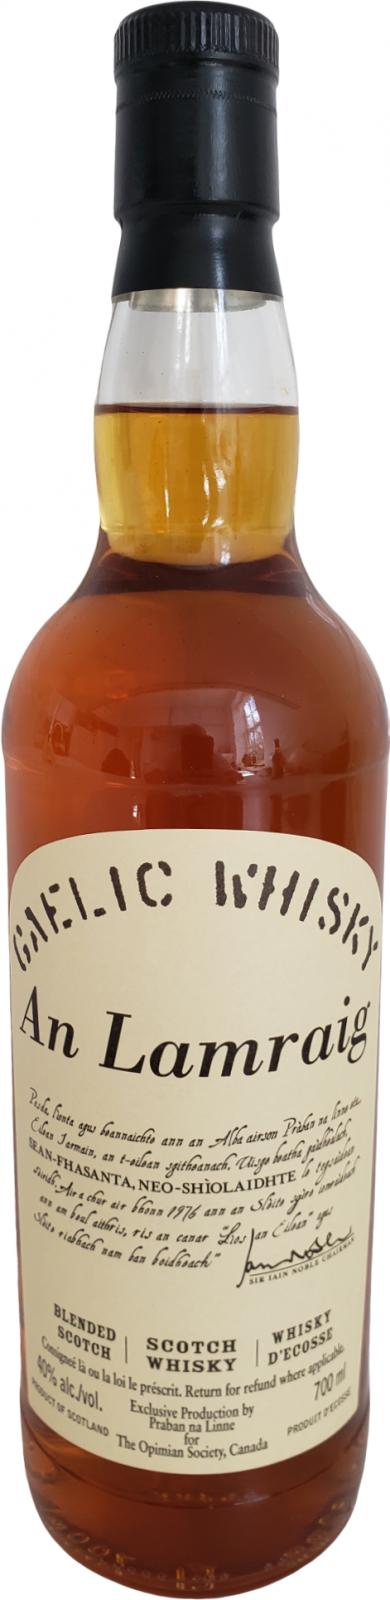 Blended Scotch Whisky An Lamraig Gaelic Whisky The Opimian Society 40% 700ml